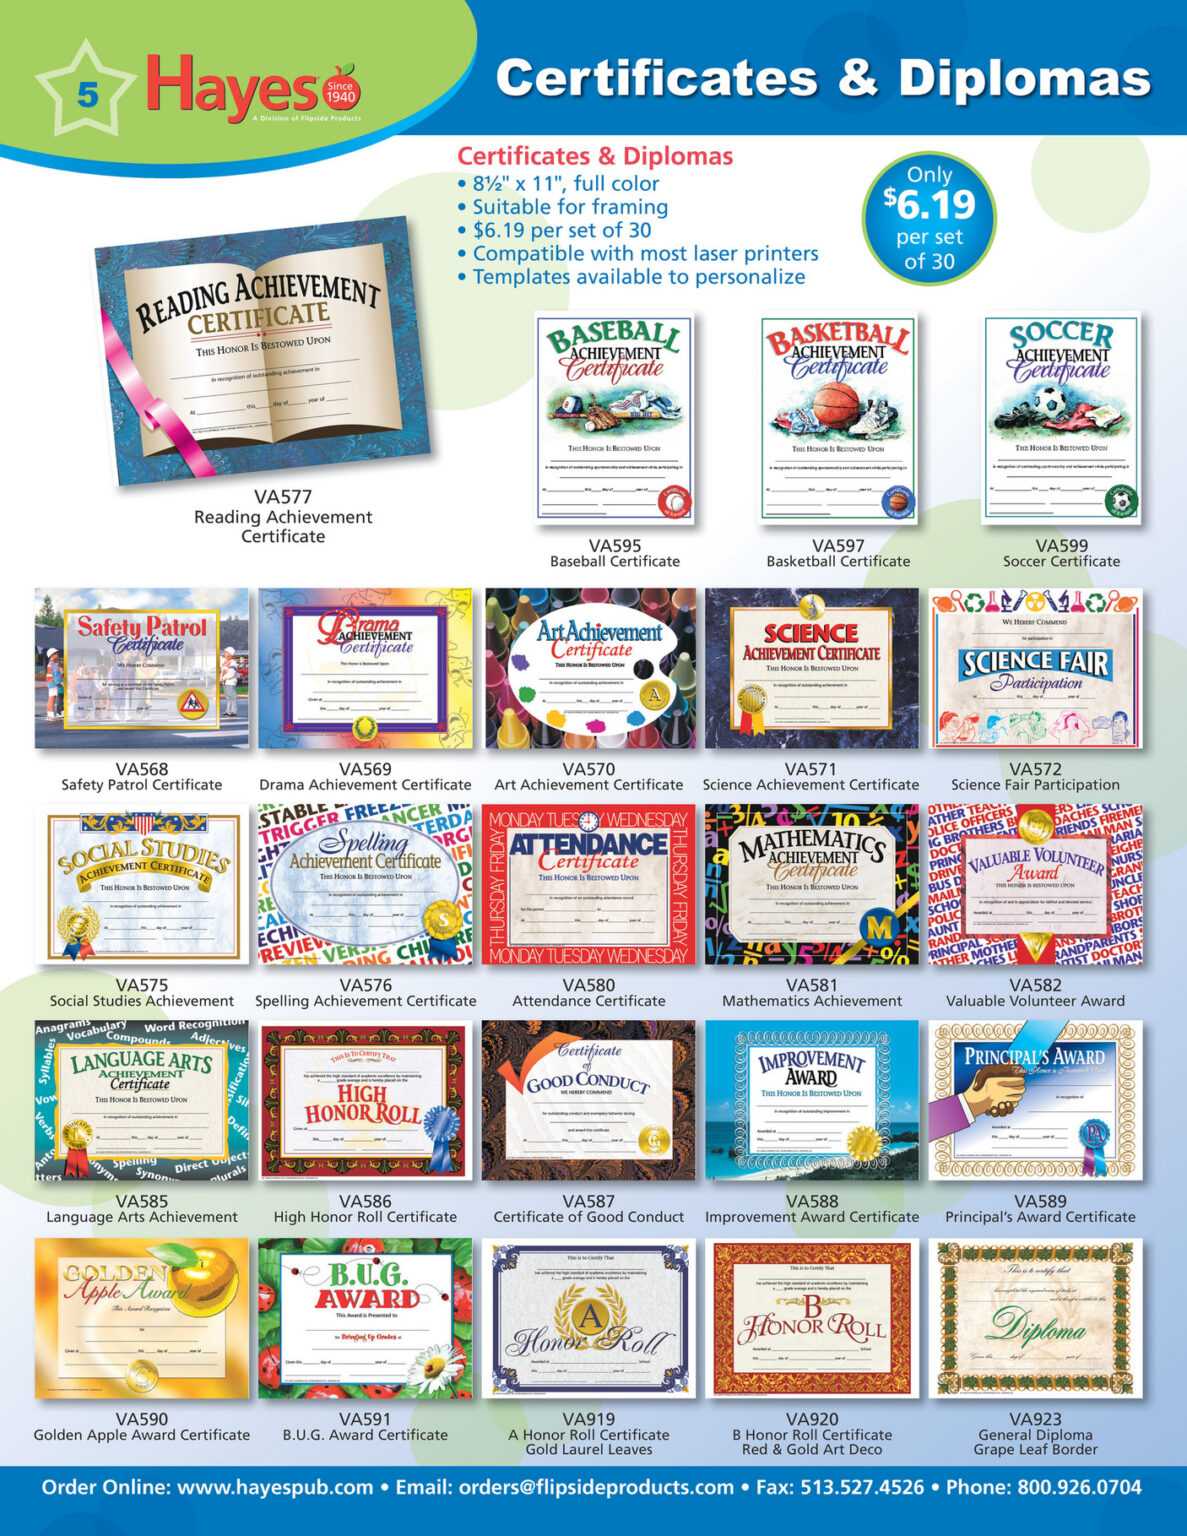 hayes-school-publishing-educational-school-supplies-k-12-pertaining-to-hayes-certificate